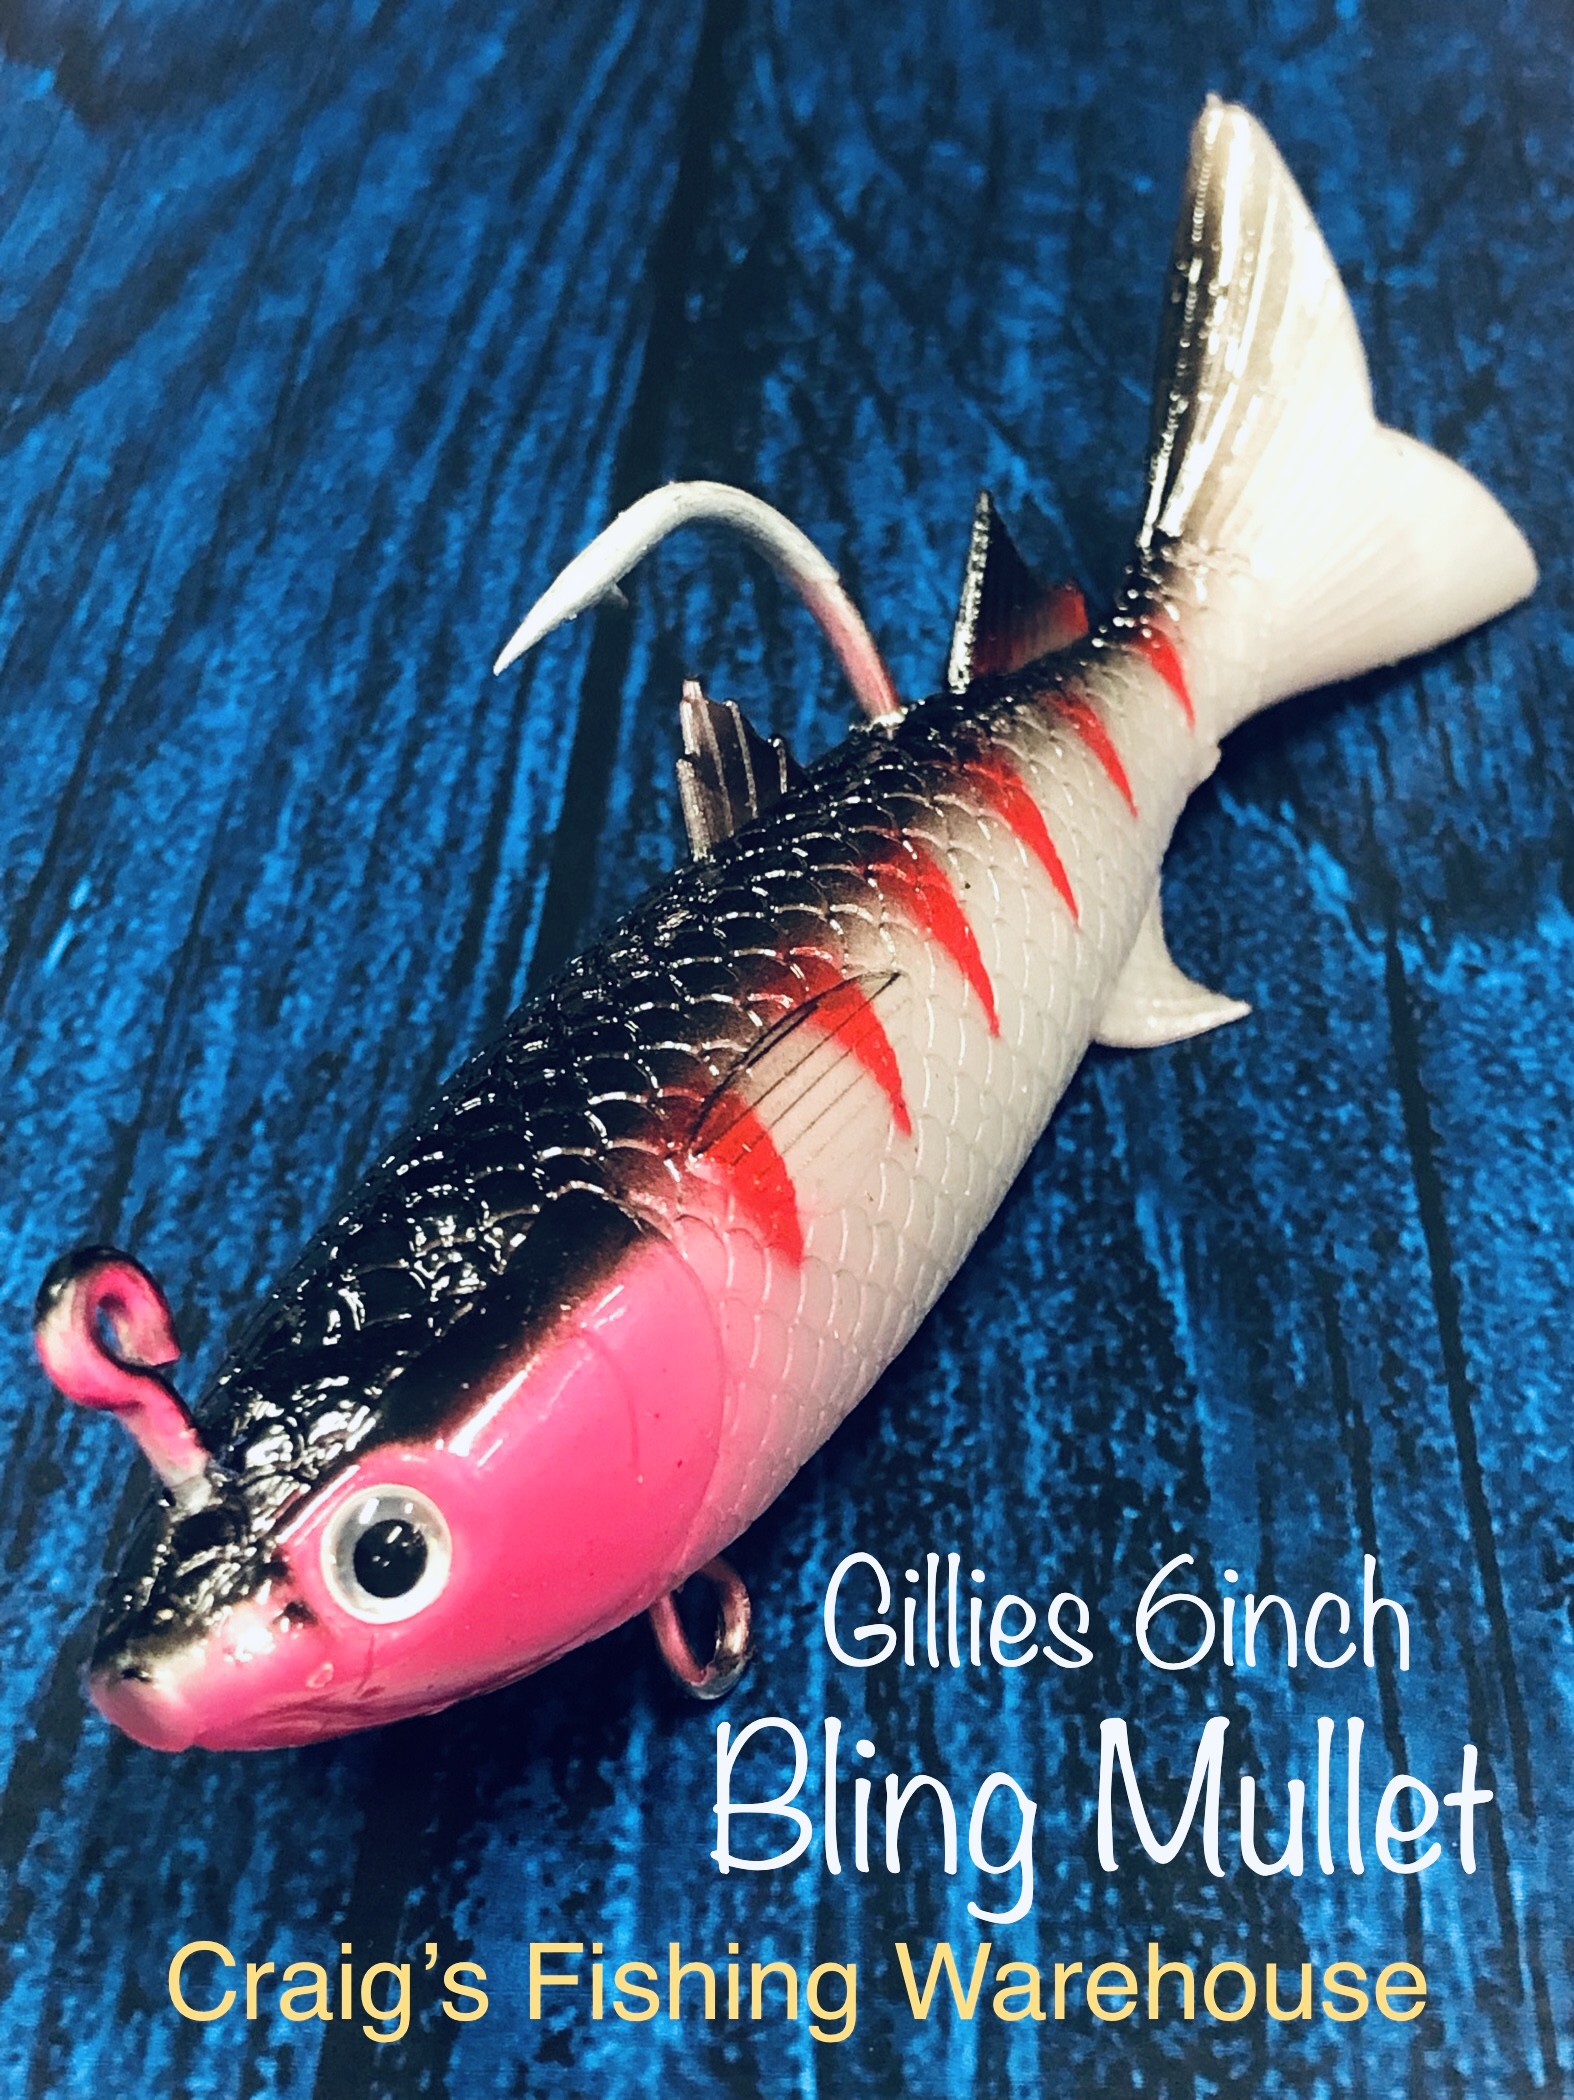 Gillies 6inch Bling Mullet